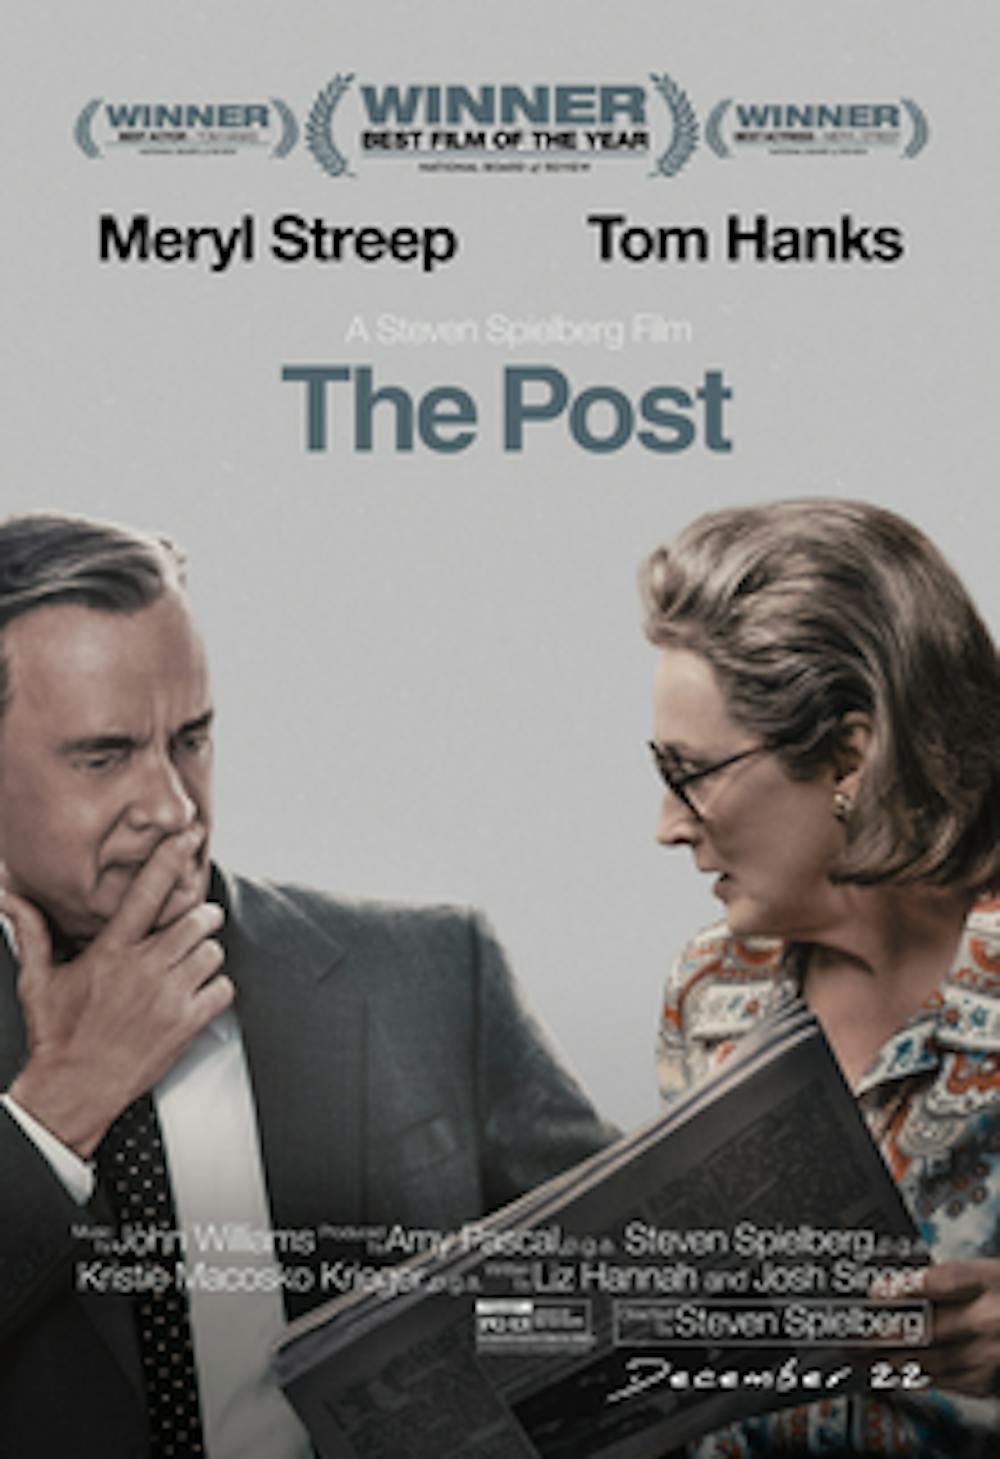 <p>Tom Hanks and Meryl Streep formed an all-star pairing in "The Post."</p>